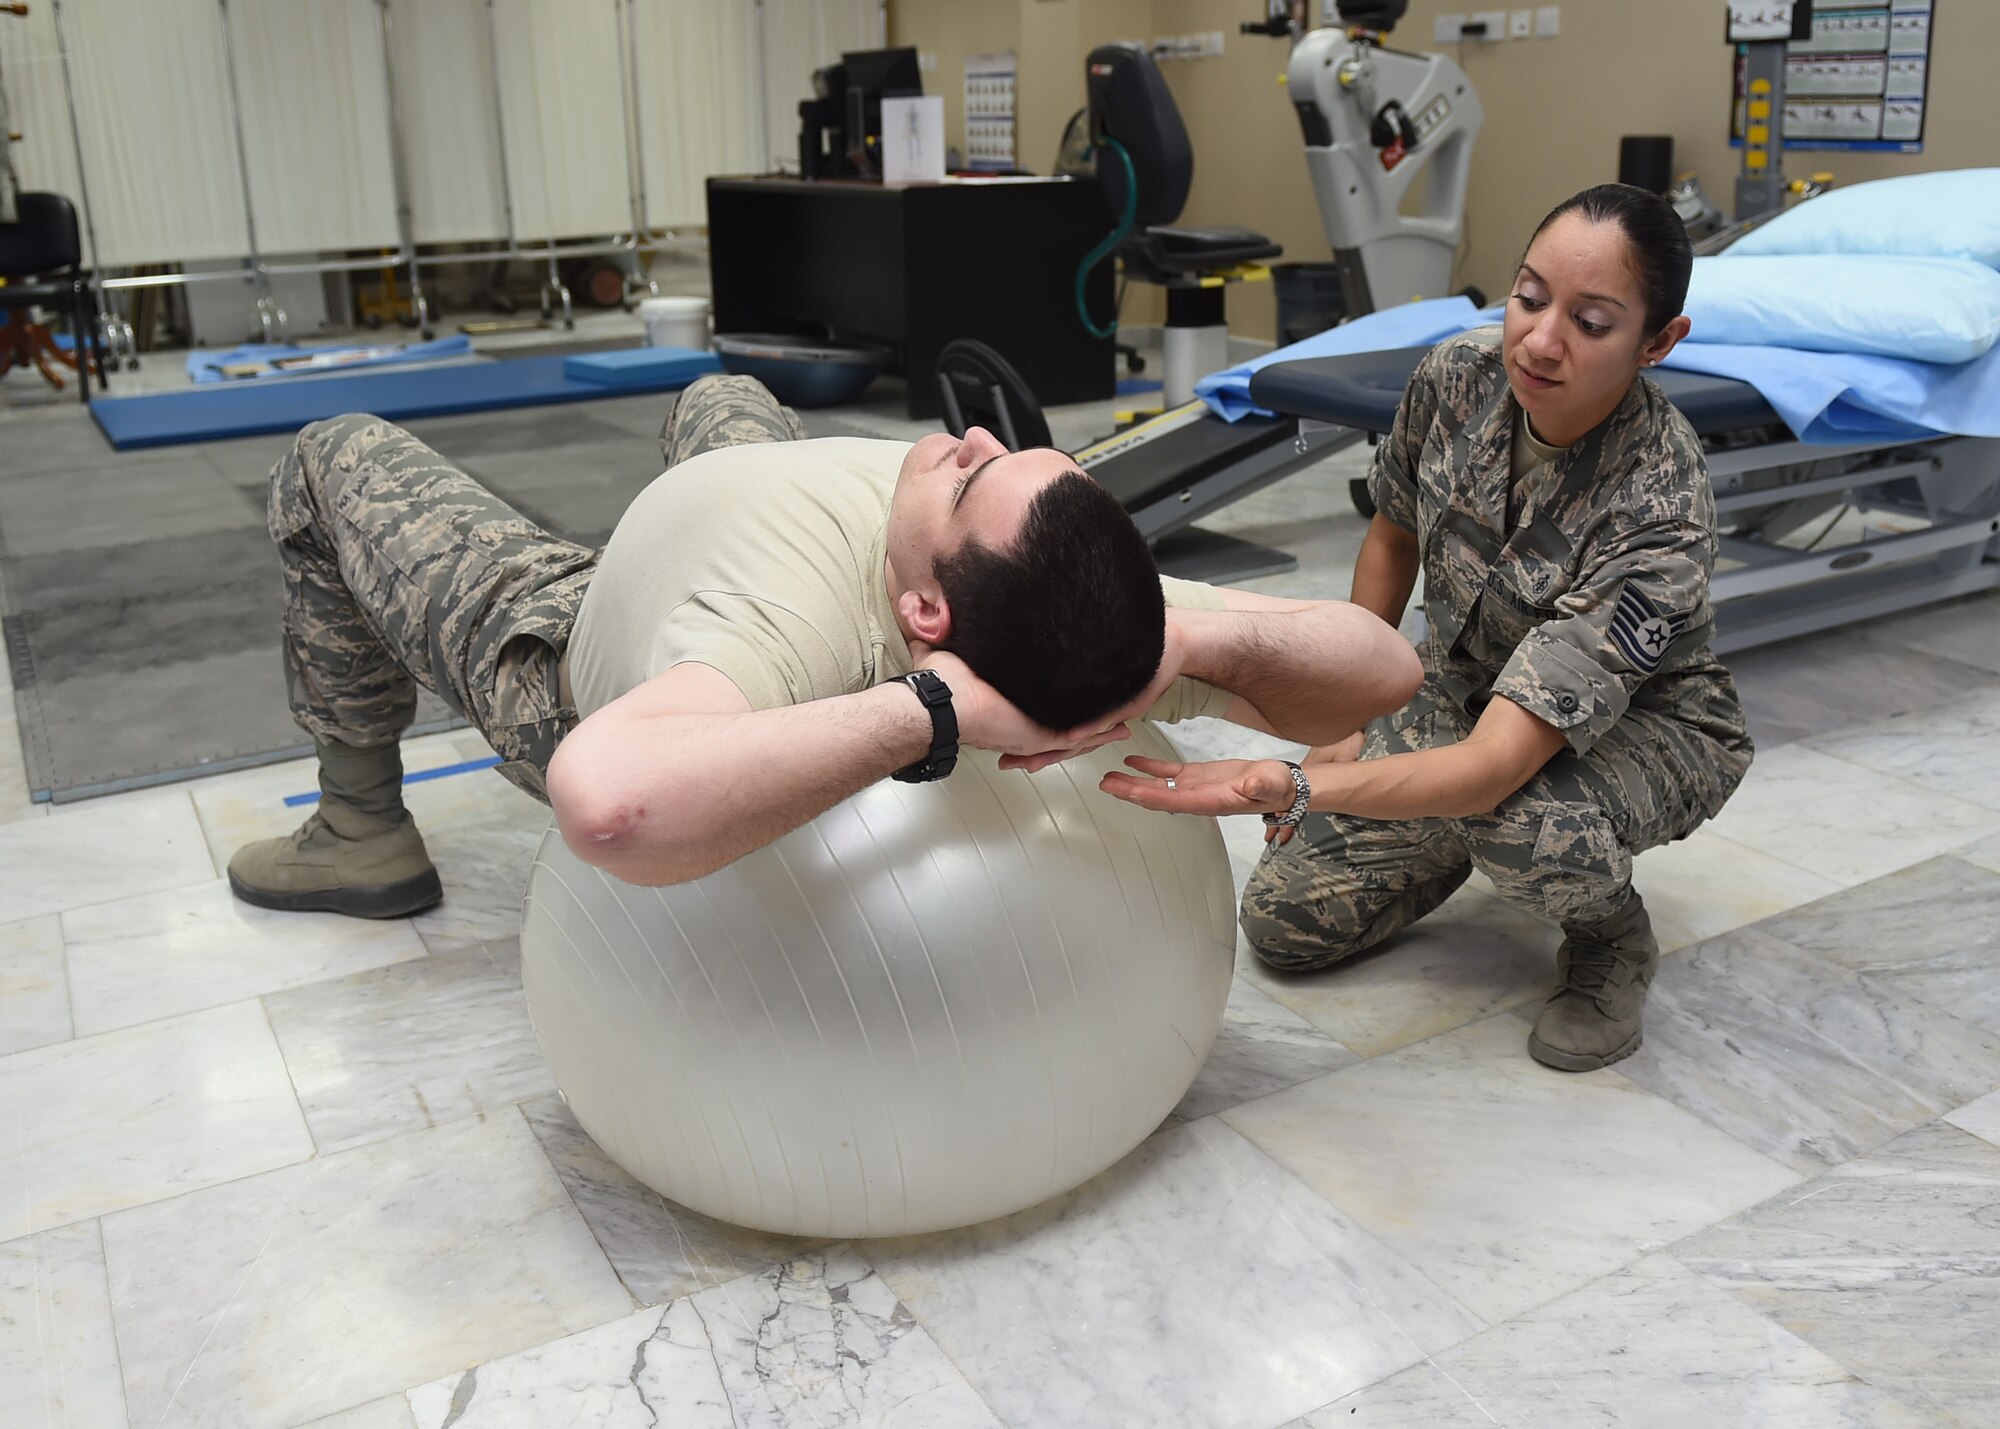 Tech. Sgt. Ruth Garcia, 386th Expeditionary Medical Group physical therapy technician, instructing a patient of proper exercise technique at an undisclosed location in Southwest Asia, March 11, 2016.The physical therapy clinic offers a variety of services including musculoskeletal evaluation and treatment, rehabilitative exercise, stretching, neuromuscular education, postural awareness, and modalities for pain management. (U.S. Air Force photo by Staff Sgt. Jerilyn Quintanilla) 